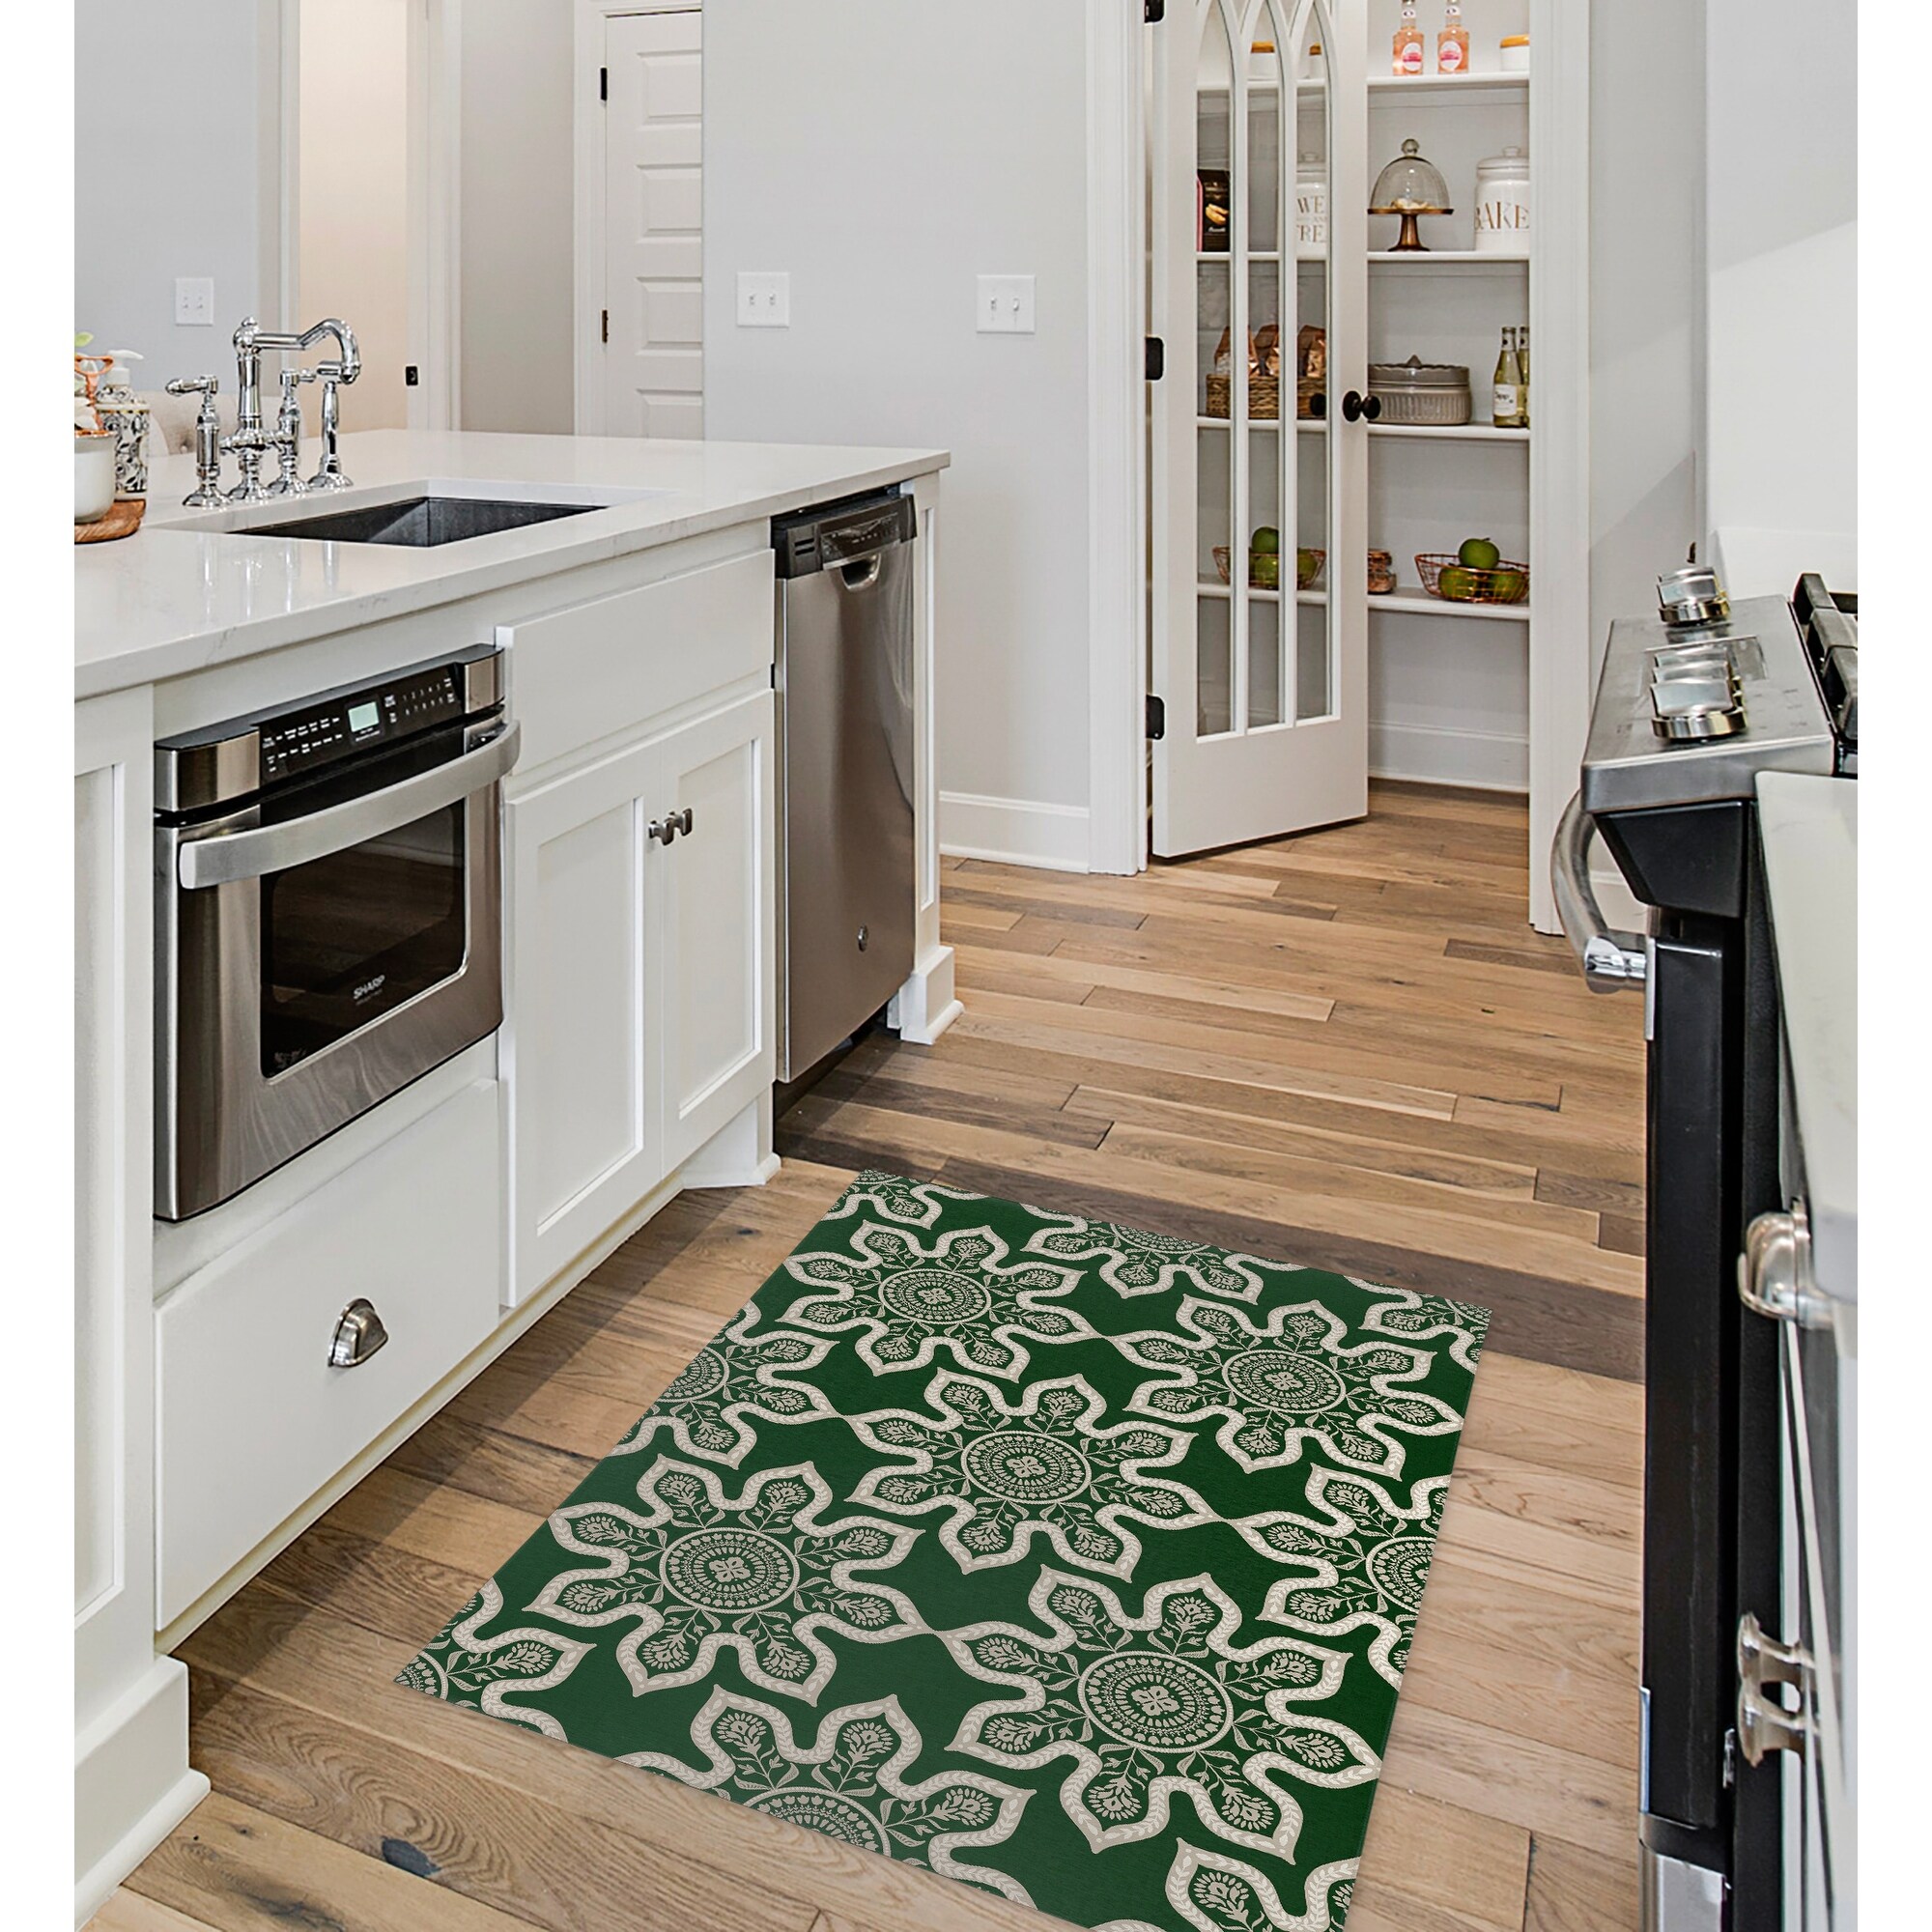 https://ak1.ostkcdn.com/images/products/is/images/direct/6ca99bd6c1b1a81a2f26c46ecb66ca95e3f34093/MULTI-MANDELA-EVERGREEN-Kitchen-Mat-By-Kavka-Designs.jpg